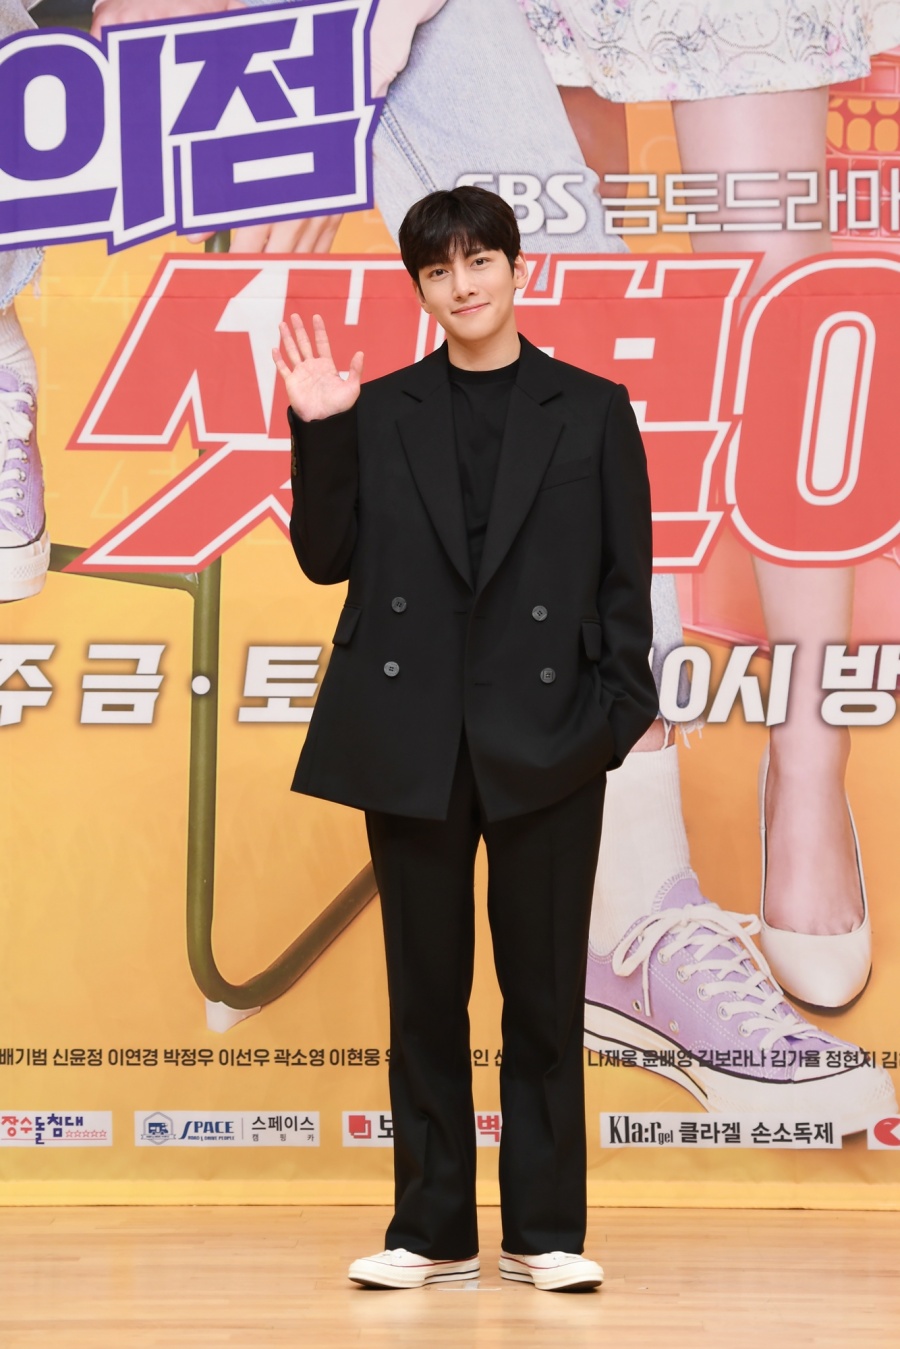 Drama Convenience store morning star with a spoonful of warmth in the exciting smile of heated priest comes to viewers.Ji Chang-wook and Kim Yoo-jung announced their determination to show a warm-heart drama at the SBS new gilt drama Convenience store morning star (playplayplay by Son Geun-joo, director Lee Myung-woo) production presentation broadcast live on SBS official YouTube channel on the 19th.Convenience store morning star is a 24-hour unpredictable comic romance drama in which Convenience store Hunnam manager Choi Dae-heon (Ji Chang-wook) and 4-dimensional part-time student Kim Yoo-jung stage Convenience store.Lee Myung-woo PD, who succeeded in Heat Blood Priest, is the first new work to be released after leaving SBS, and global media group ANN is gathering attention as a work that Networks first invested in Korea Drama.Convenience store morning star is based on the original webtoon of the same name, and there was a concern that the original work was 19 gold webtoon with violence and selectivity.Lee Myung-woo PD, who is well aware of the concerns of some viewers, said, Since Convenience store morning star is aiming for a program that the whole family can see, I made a lot of efforts to make the drama that the whole family can enjoy by taking the character power and positive elements of the original work. I think I could make it well with a family drama that is far from it. Lee Myung-woo PD, who boasts a comic craftsman down performance with Fever Blood Priest, presents comic romance with Convenience store morning star.Its a Drama that has a different texture from the heat-blooded priest comic.Convenience store morning star is a family comedy created by people who are warmer to their hearts, such as mothers, fathers, younger siblings, and friends. Golden time zone should compete with other channel entertainment programs.I am trying to make a program that is as fun as entertainment and is more impressive than entertainment. Ji Chang-wook plays Hunan manager Choi Dae-heon.Ji Chang-wook said: Choi Dae-heon is an honest, pure, passionate figure.Not like any other Drama character, he is not a special person, but a real and indecisive person. This role is not so cool. You should not expect cool. Lee Myung-woo PD thanked Ji Chang-wook for his generously broken up for Choi Dae-heon.I did the best-looking Actor in Korea, and there was Ji Chang-wook at the top, and I contacted him, but I was grateful for the kite, the PD said.Actors with a lot of female fandom have a part to compromise on the right line because the image should not be broken.However, Ji Chang-wook first suggested that he should go more by looking at the edits of the first and second editions.I can do that later, but I do not spare my body enough to think about the sequel, and I am immersed in the character. I am comforted and encouraged by the director. Kim Yoo-jung played the role of a 4-dimensional part-time student.Kim Yoo-jung prepared a brilliant action by going to the Action School for the role of the star that needs action acting.He said, Le Bron Basketball Battle: Mortal Combat Warr thought he wanted to do it perfectly, but the director said it was useless if he did not do his action himself.Its a result of trying so hard, he said, proud.Lee Myung-woo PD commented on Kim Yoo-jungs action, I thought it would be such an actor who thinks that the star is a somewhat rough-looking character and that the audience sees the stars star-shaped character and thinks it is pretty and cute.There are so many actions, but Kim Yoo-jung has digested it almost without a band. You know when you watch the broadcast, it is really huge. Convenience store morning star is expected to convey the heartwarming story to viewers in the background of Convenience store.Lee Myung-woo PD said: One word I thought from the time I planned the drama is warmth.I think that there will be frustration in the mind because of various economic and disease situations these days.I think we would like to laugh and laugh for an hour while watching our drama in this situation. Convenience store morning star will be broadcasted at 10 pm on the 19th.=